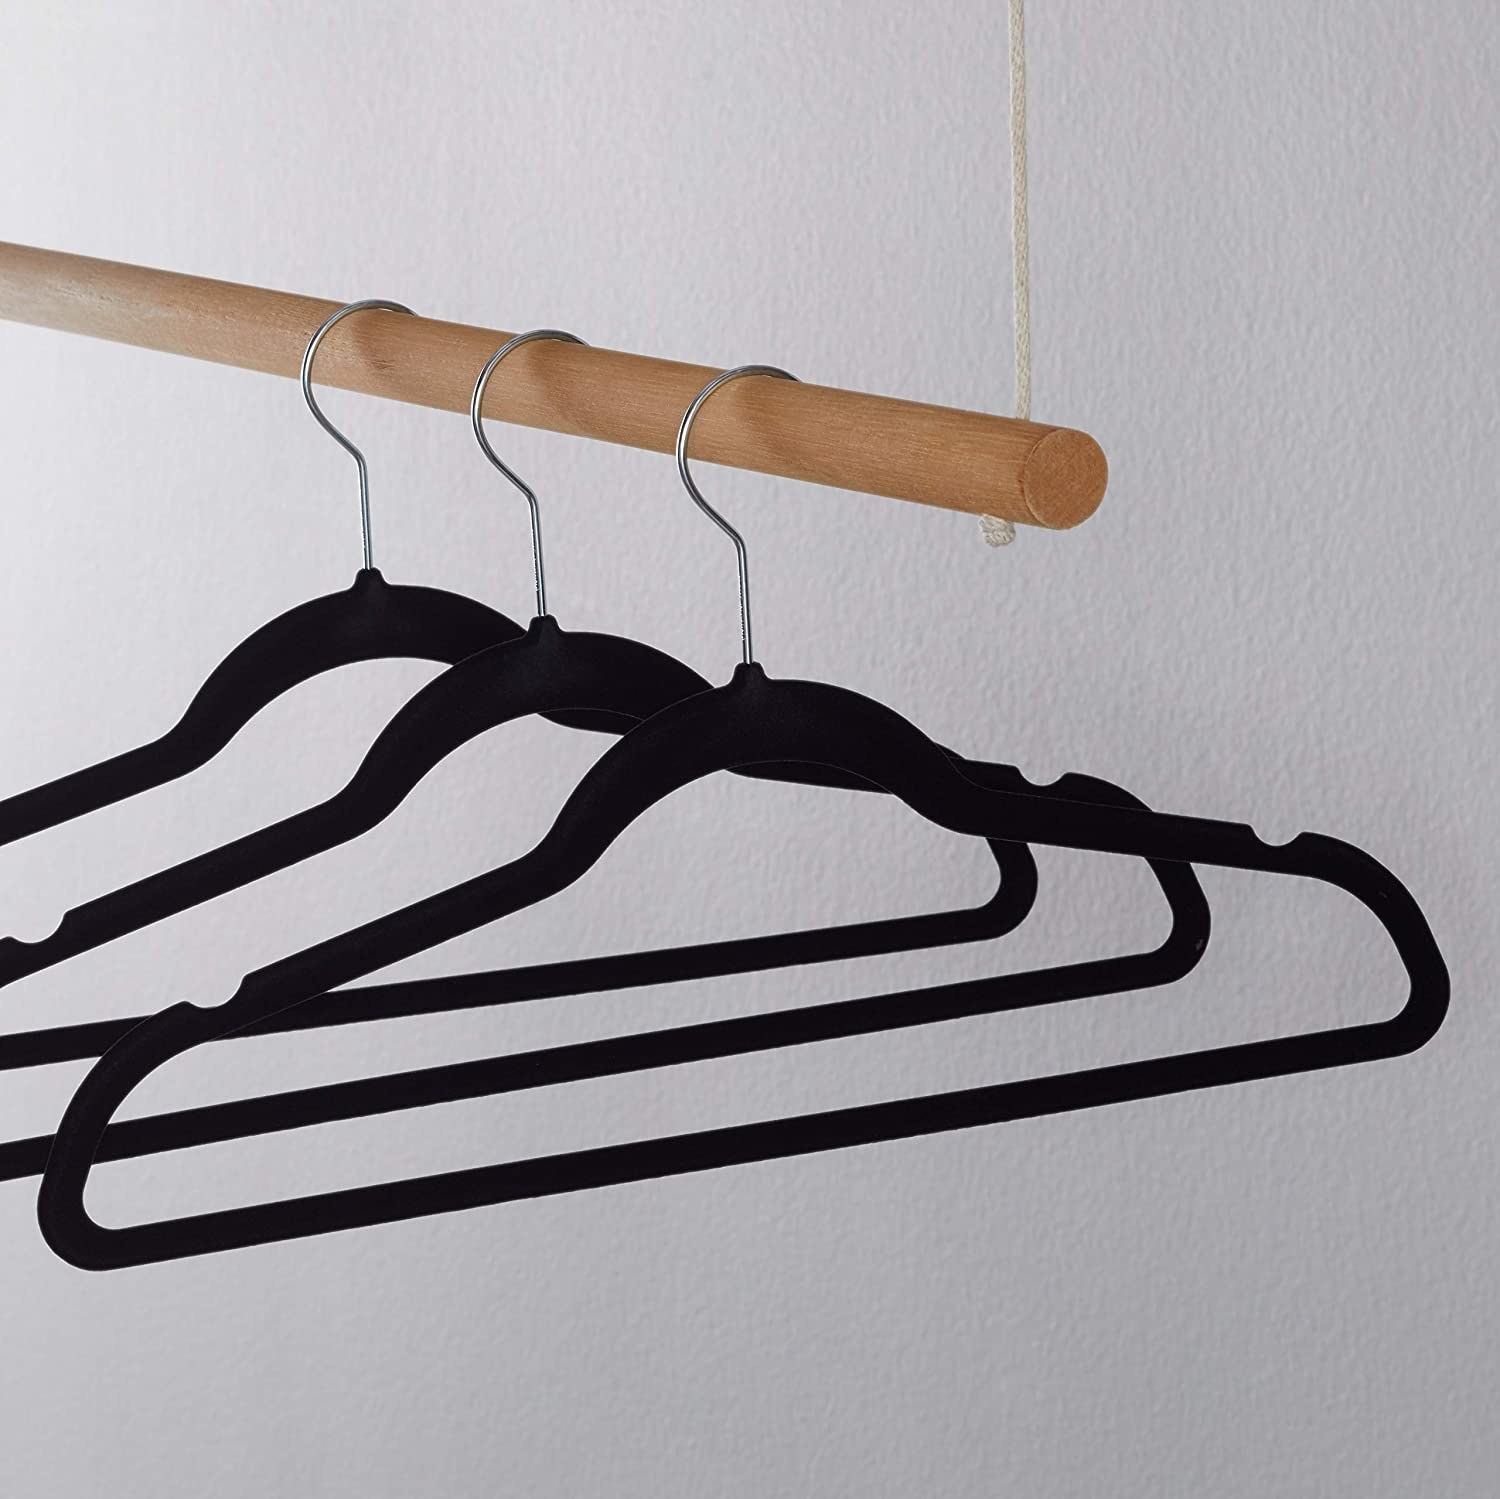 Three hangers on a wooden rod